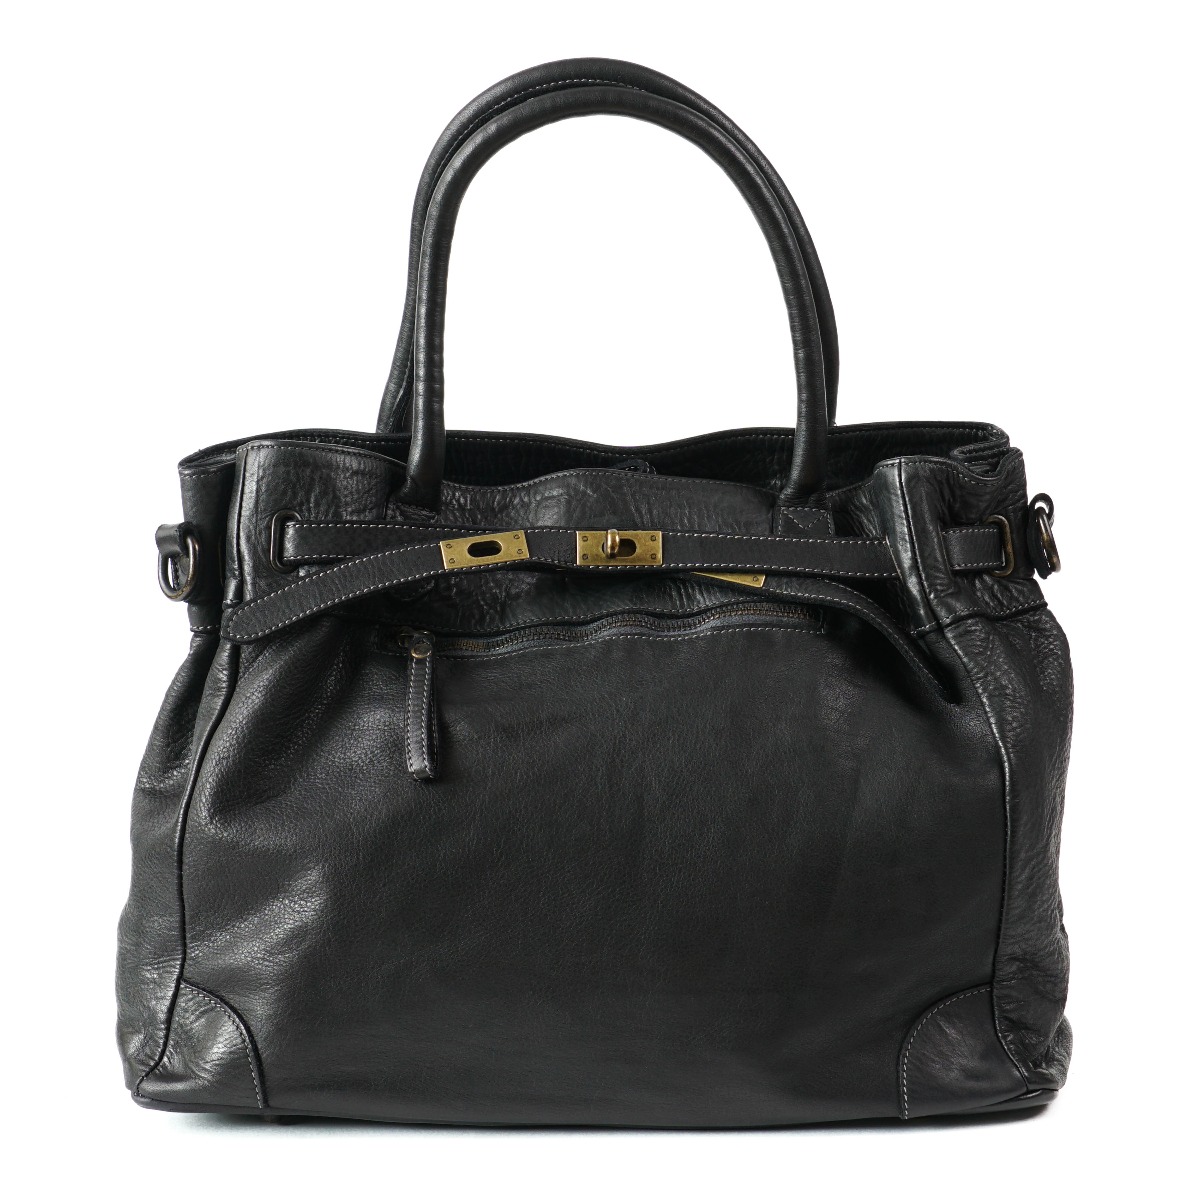 Washed leather women tote bag black color